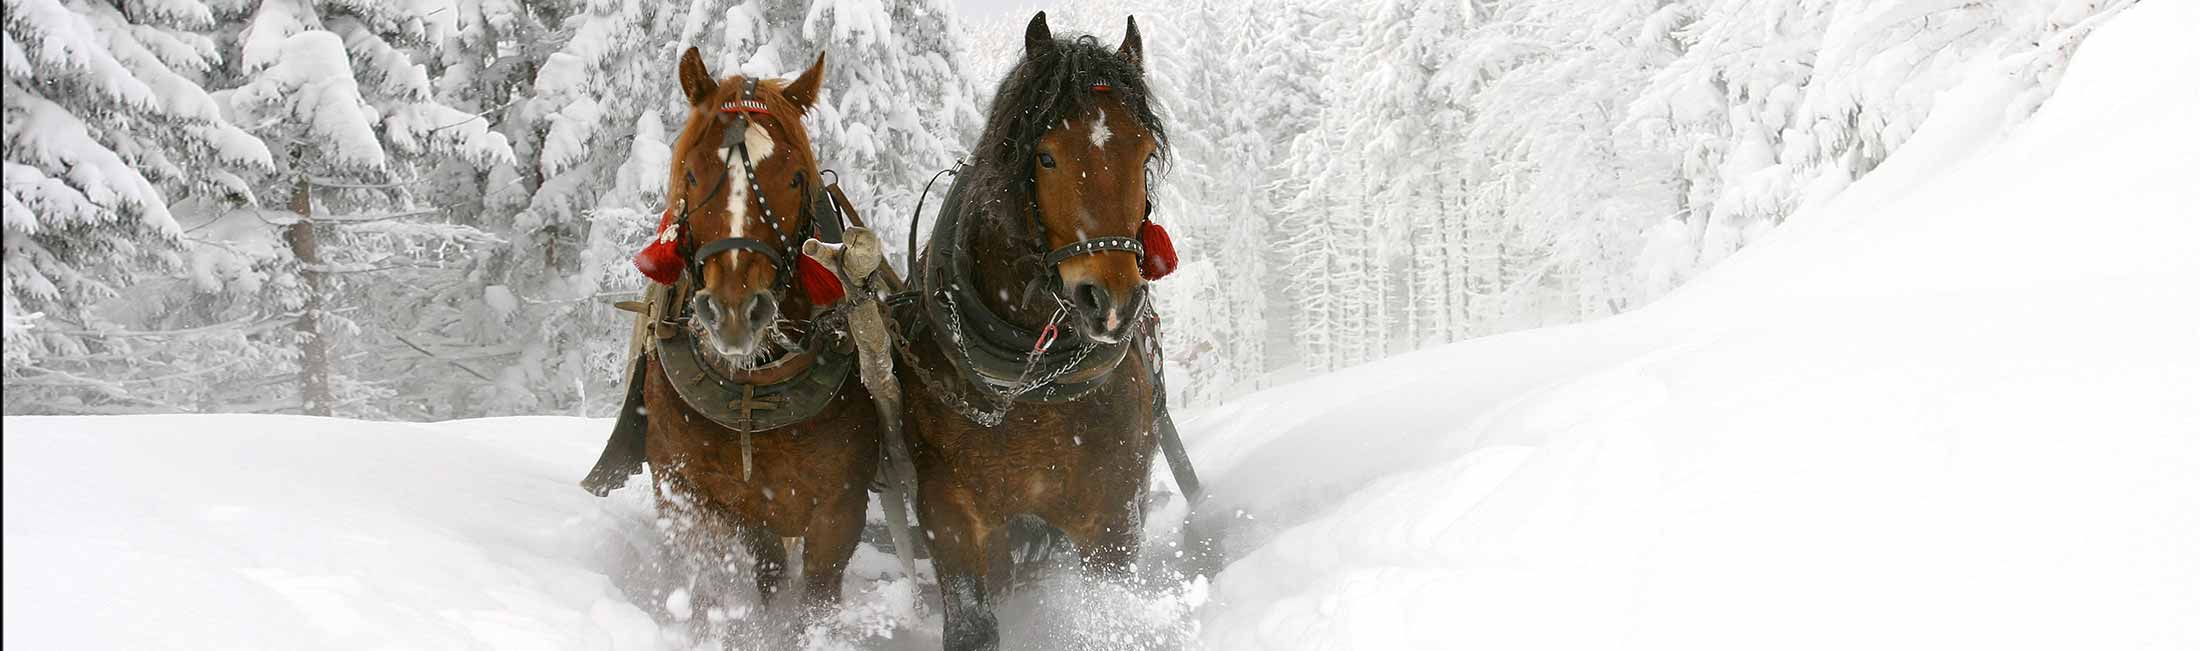 Take Time For a Sleigh Ride